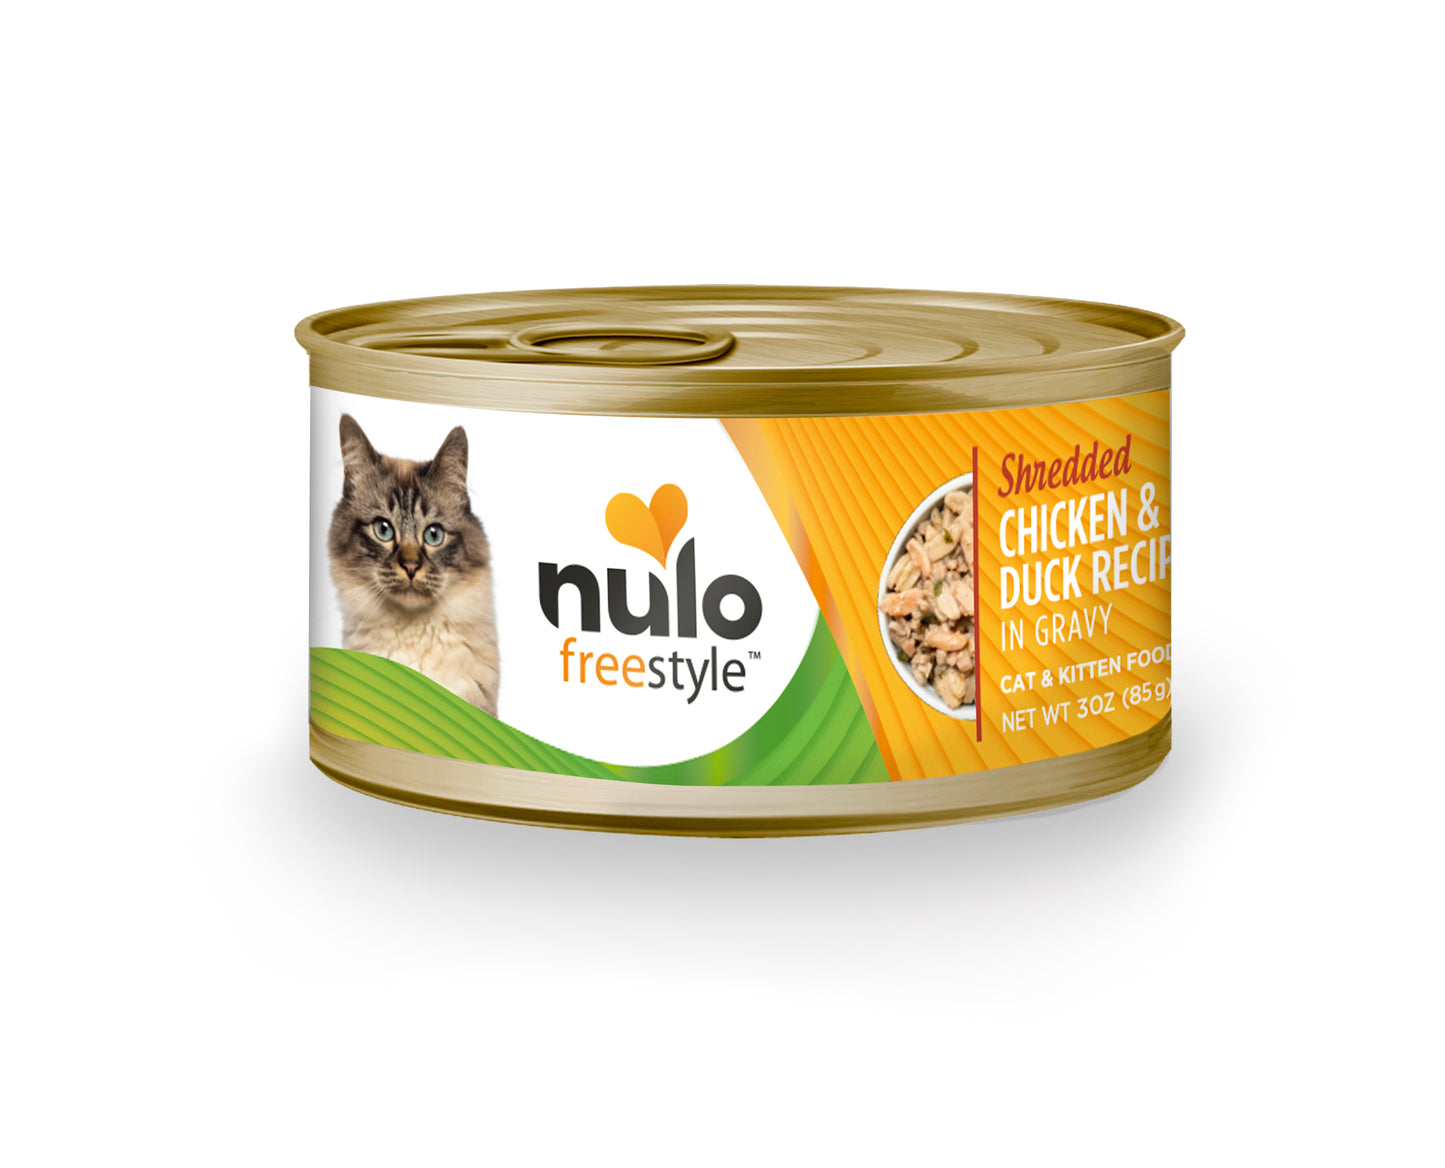 Nulo Freestyle Shredded Chicken & Duck Recipe in gravy for Cats